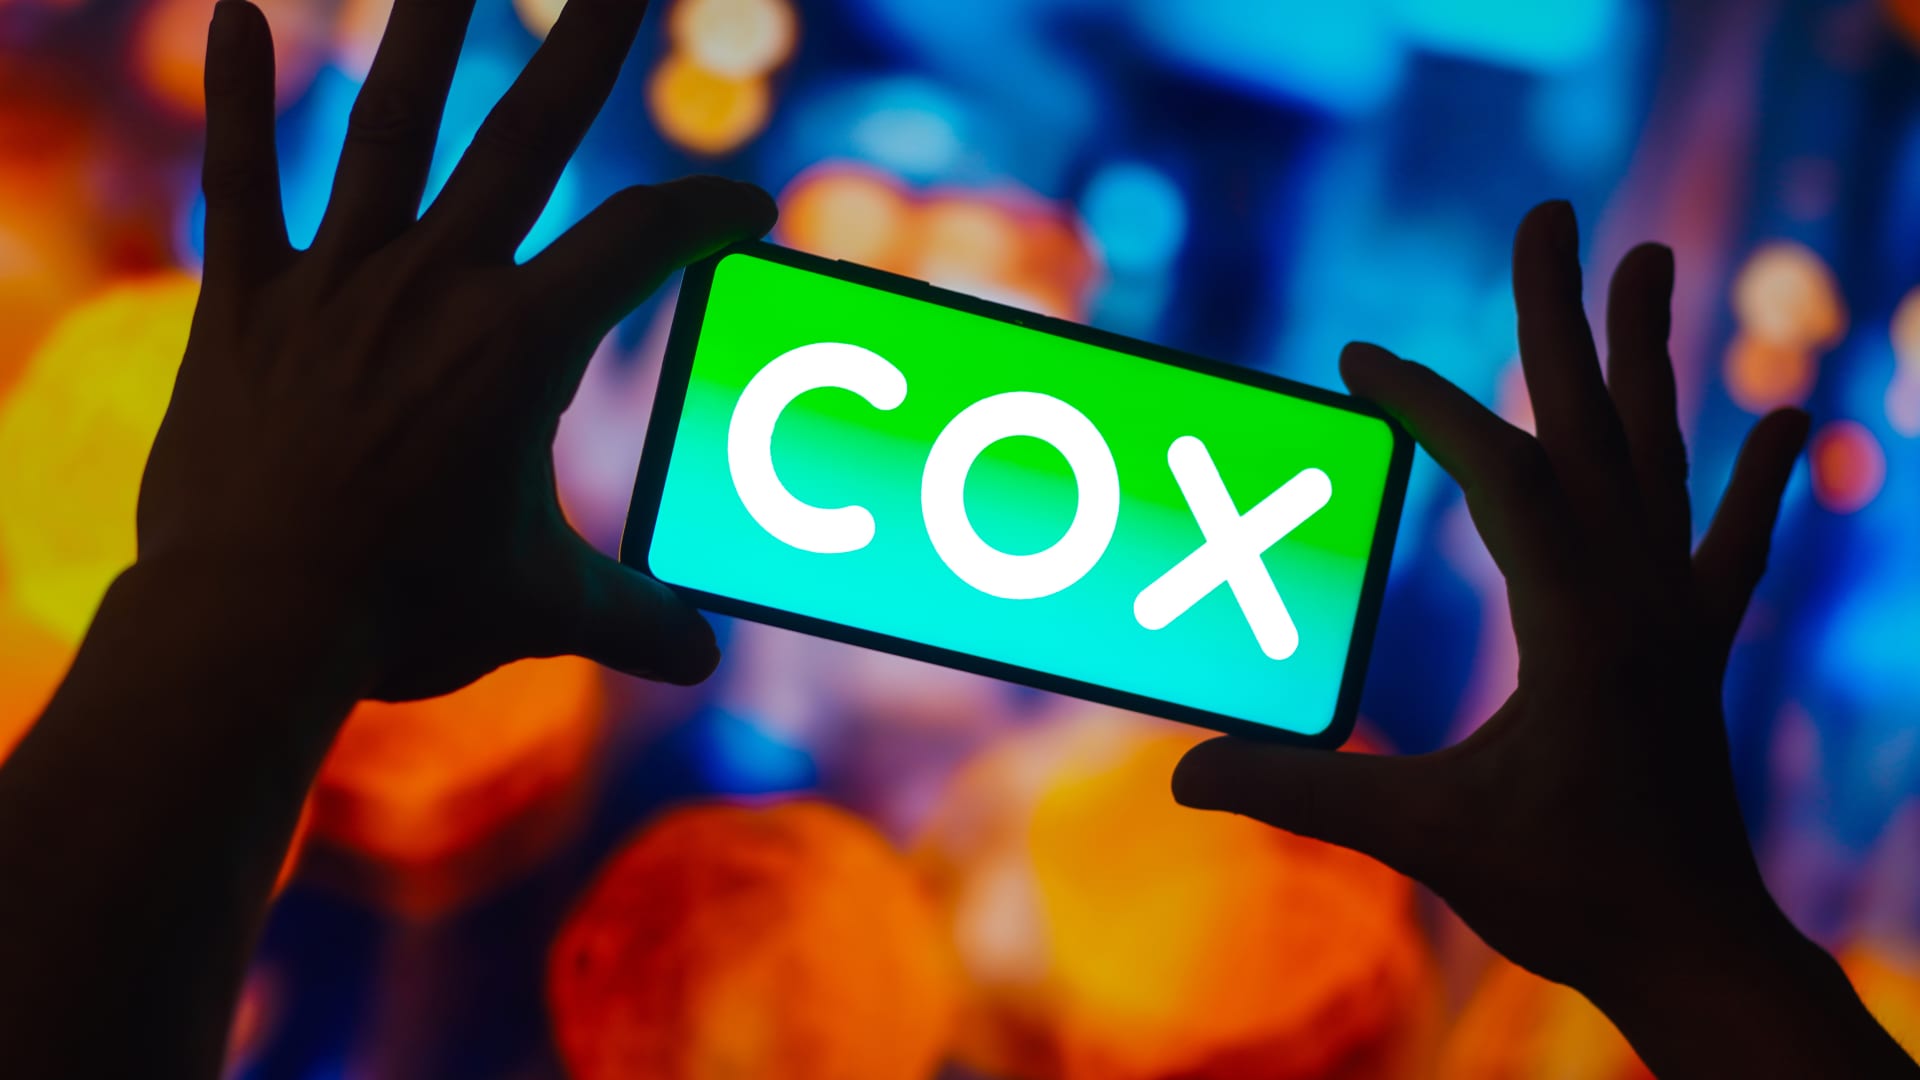 In this photo illustration, the Cox Communications logo is displayed on a smartphone screen.